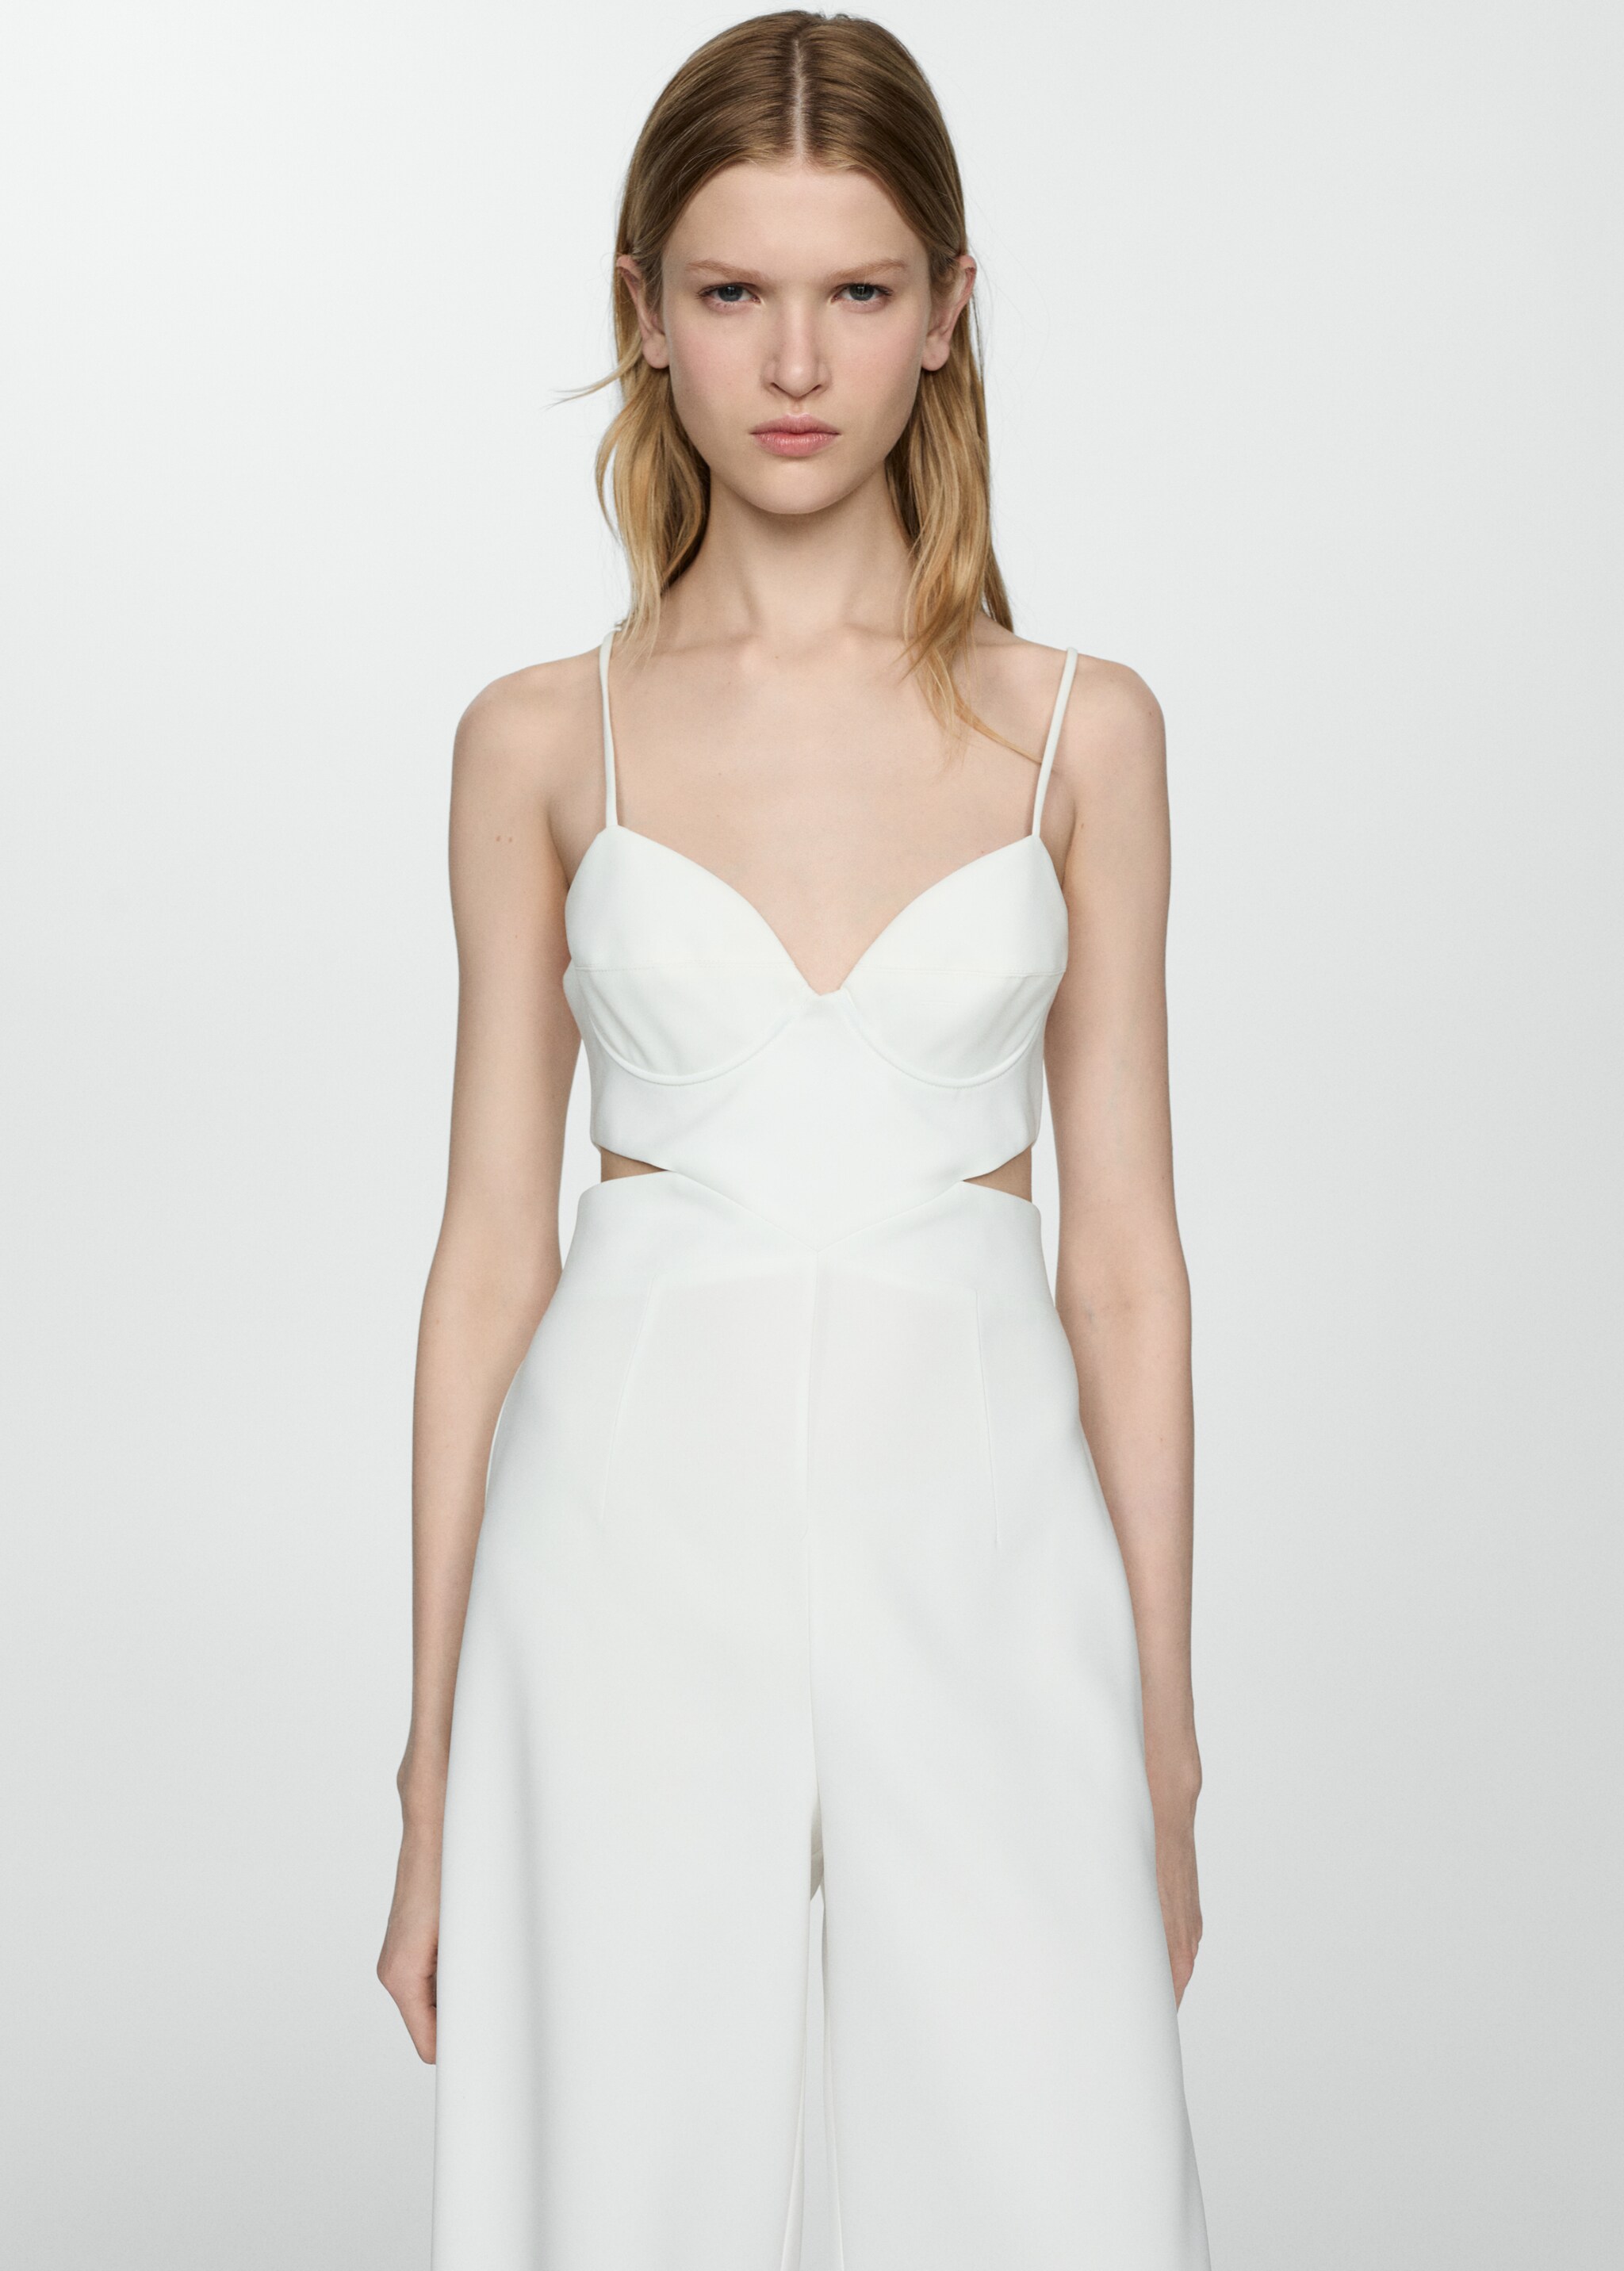 Jumpsuit with straps and side slits - Medium plane